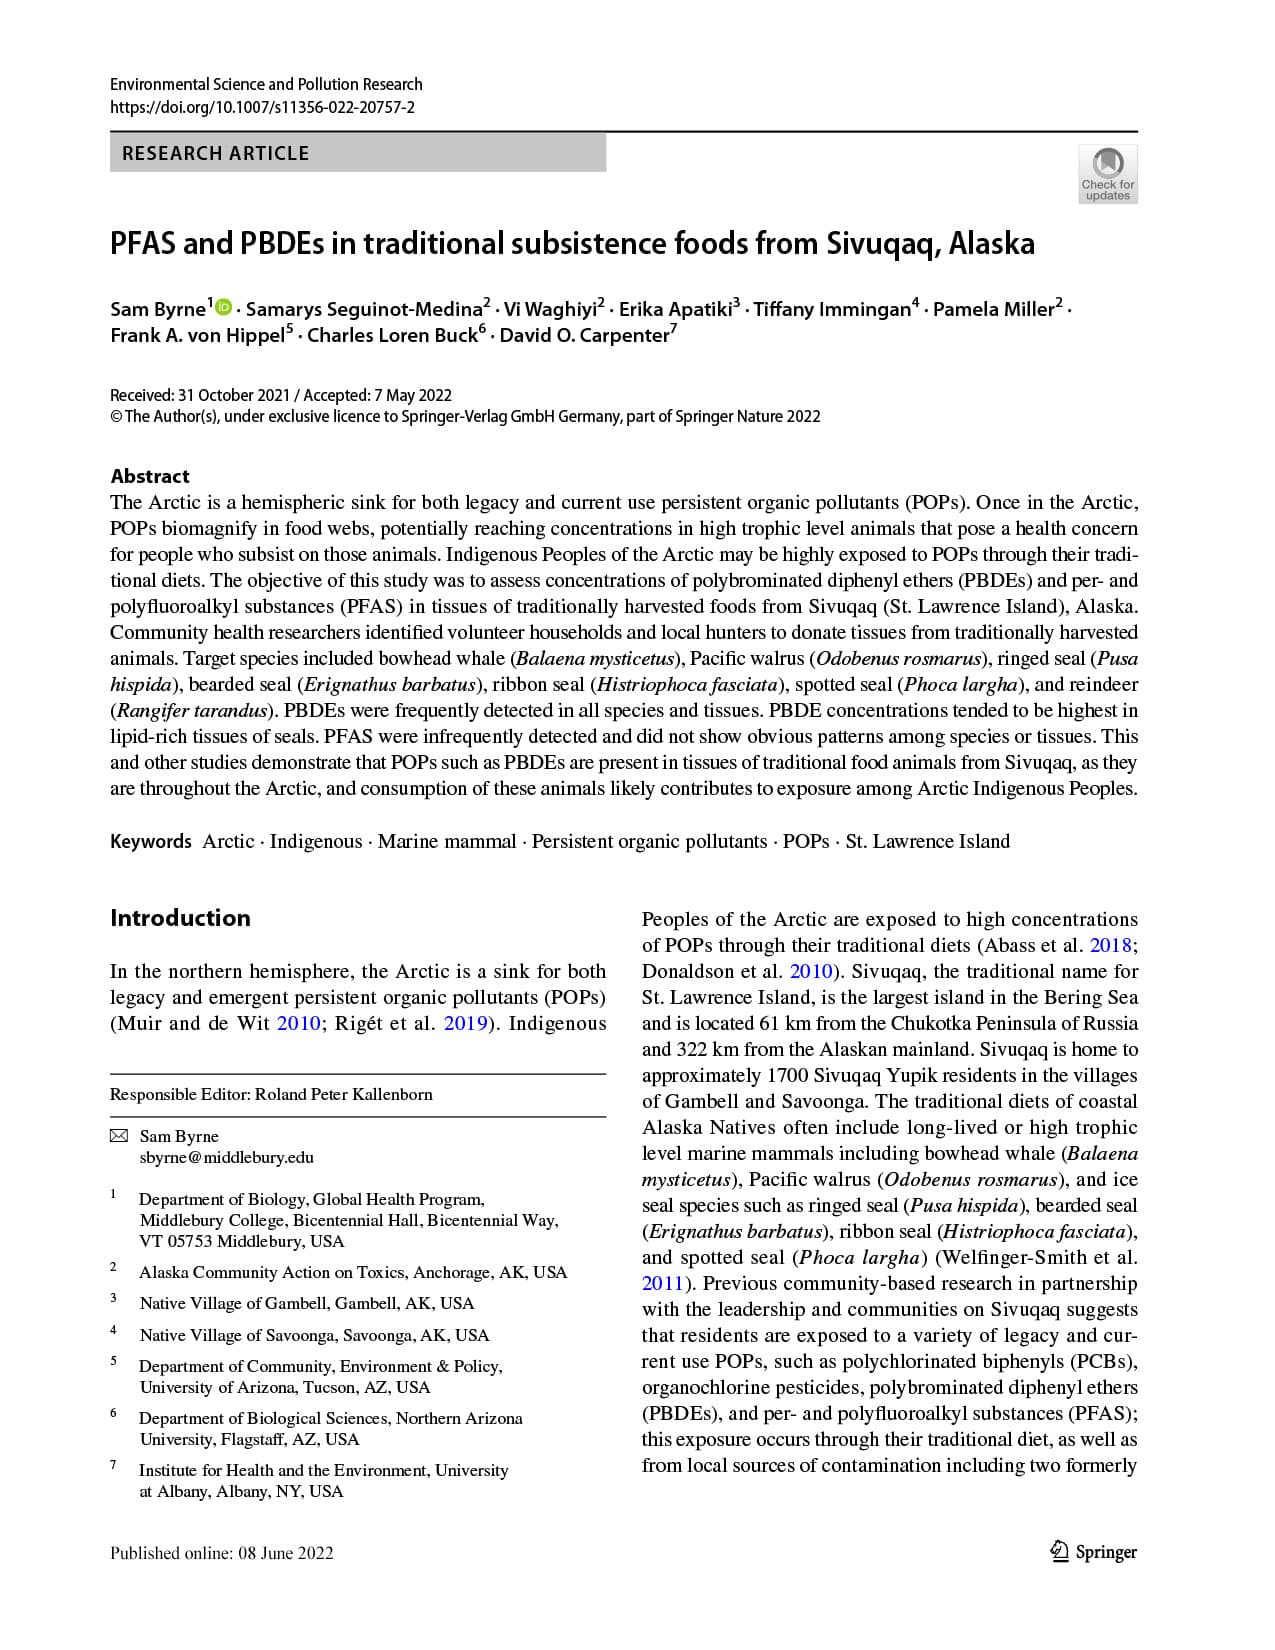 Byrne_2022_PFAS-and-PBDEs-in-traditional-foods-from-Sivuqaq_cover